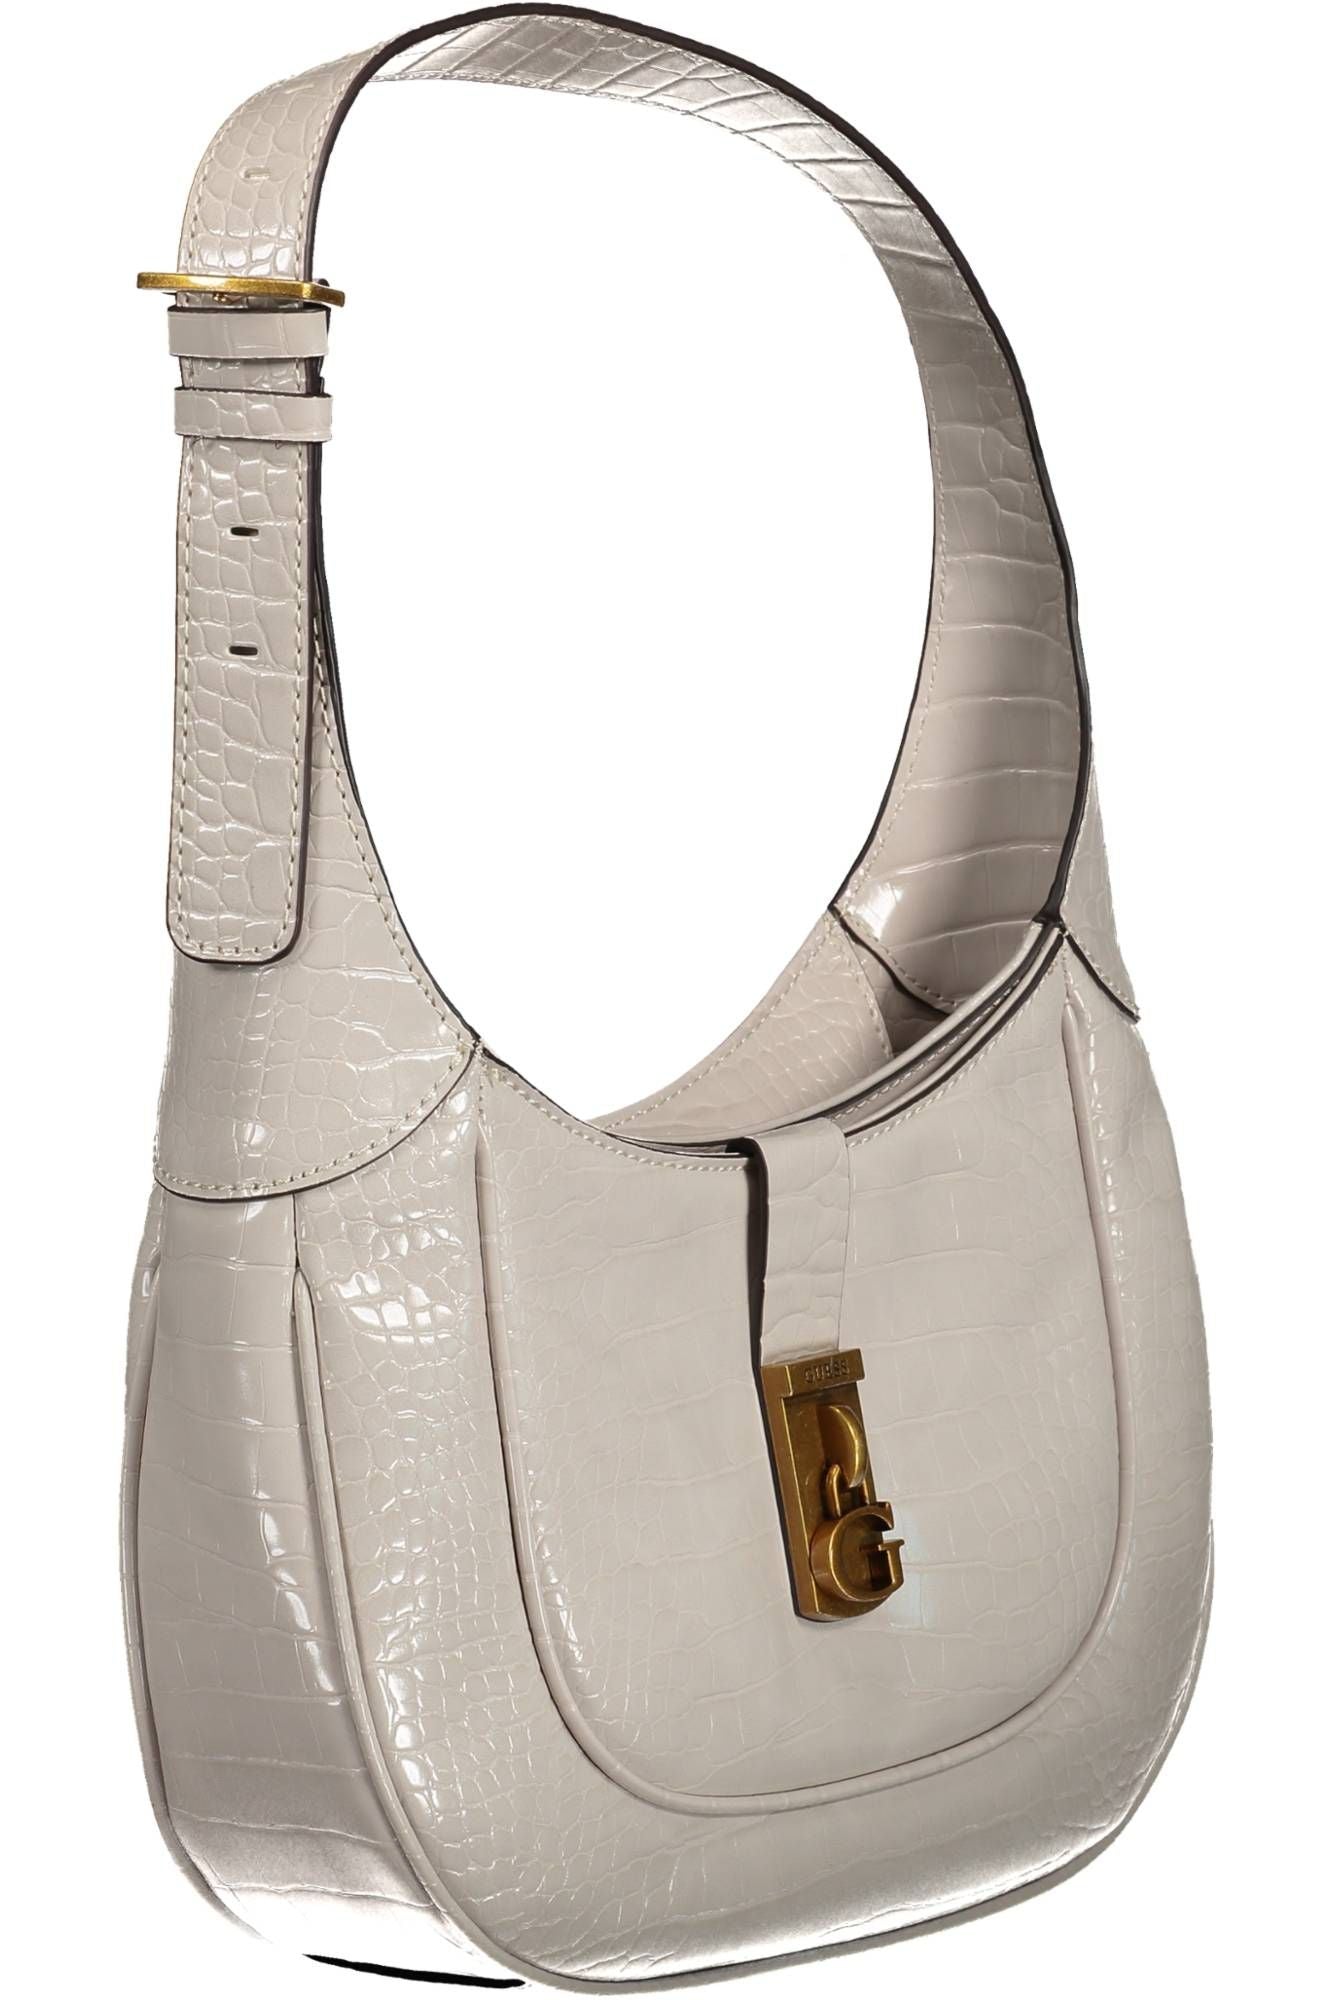 Guess Jeans Chic Gray Shoulder Bag with Contrasting Details